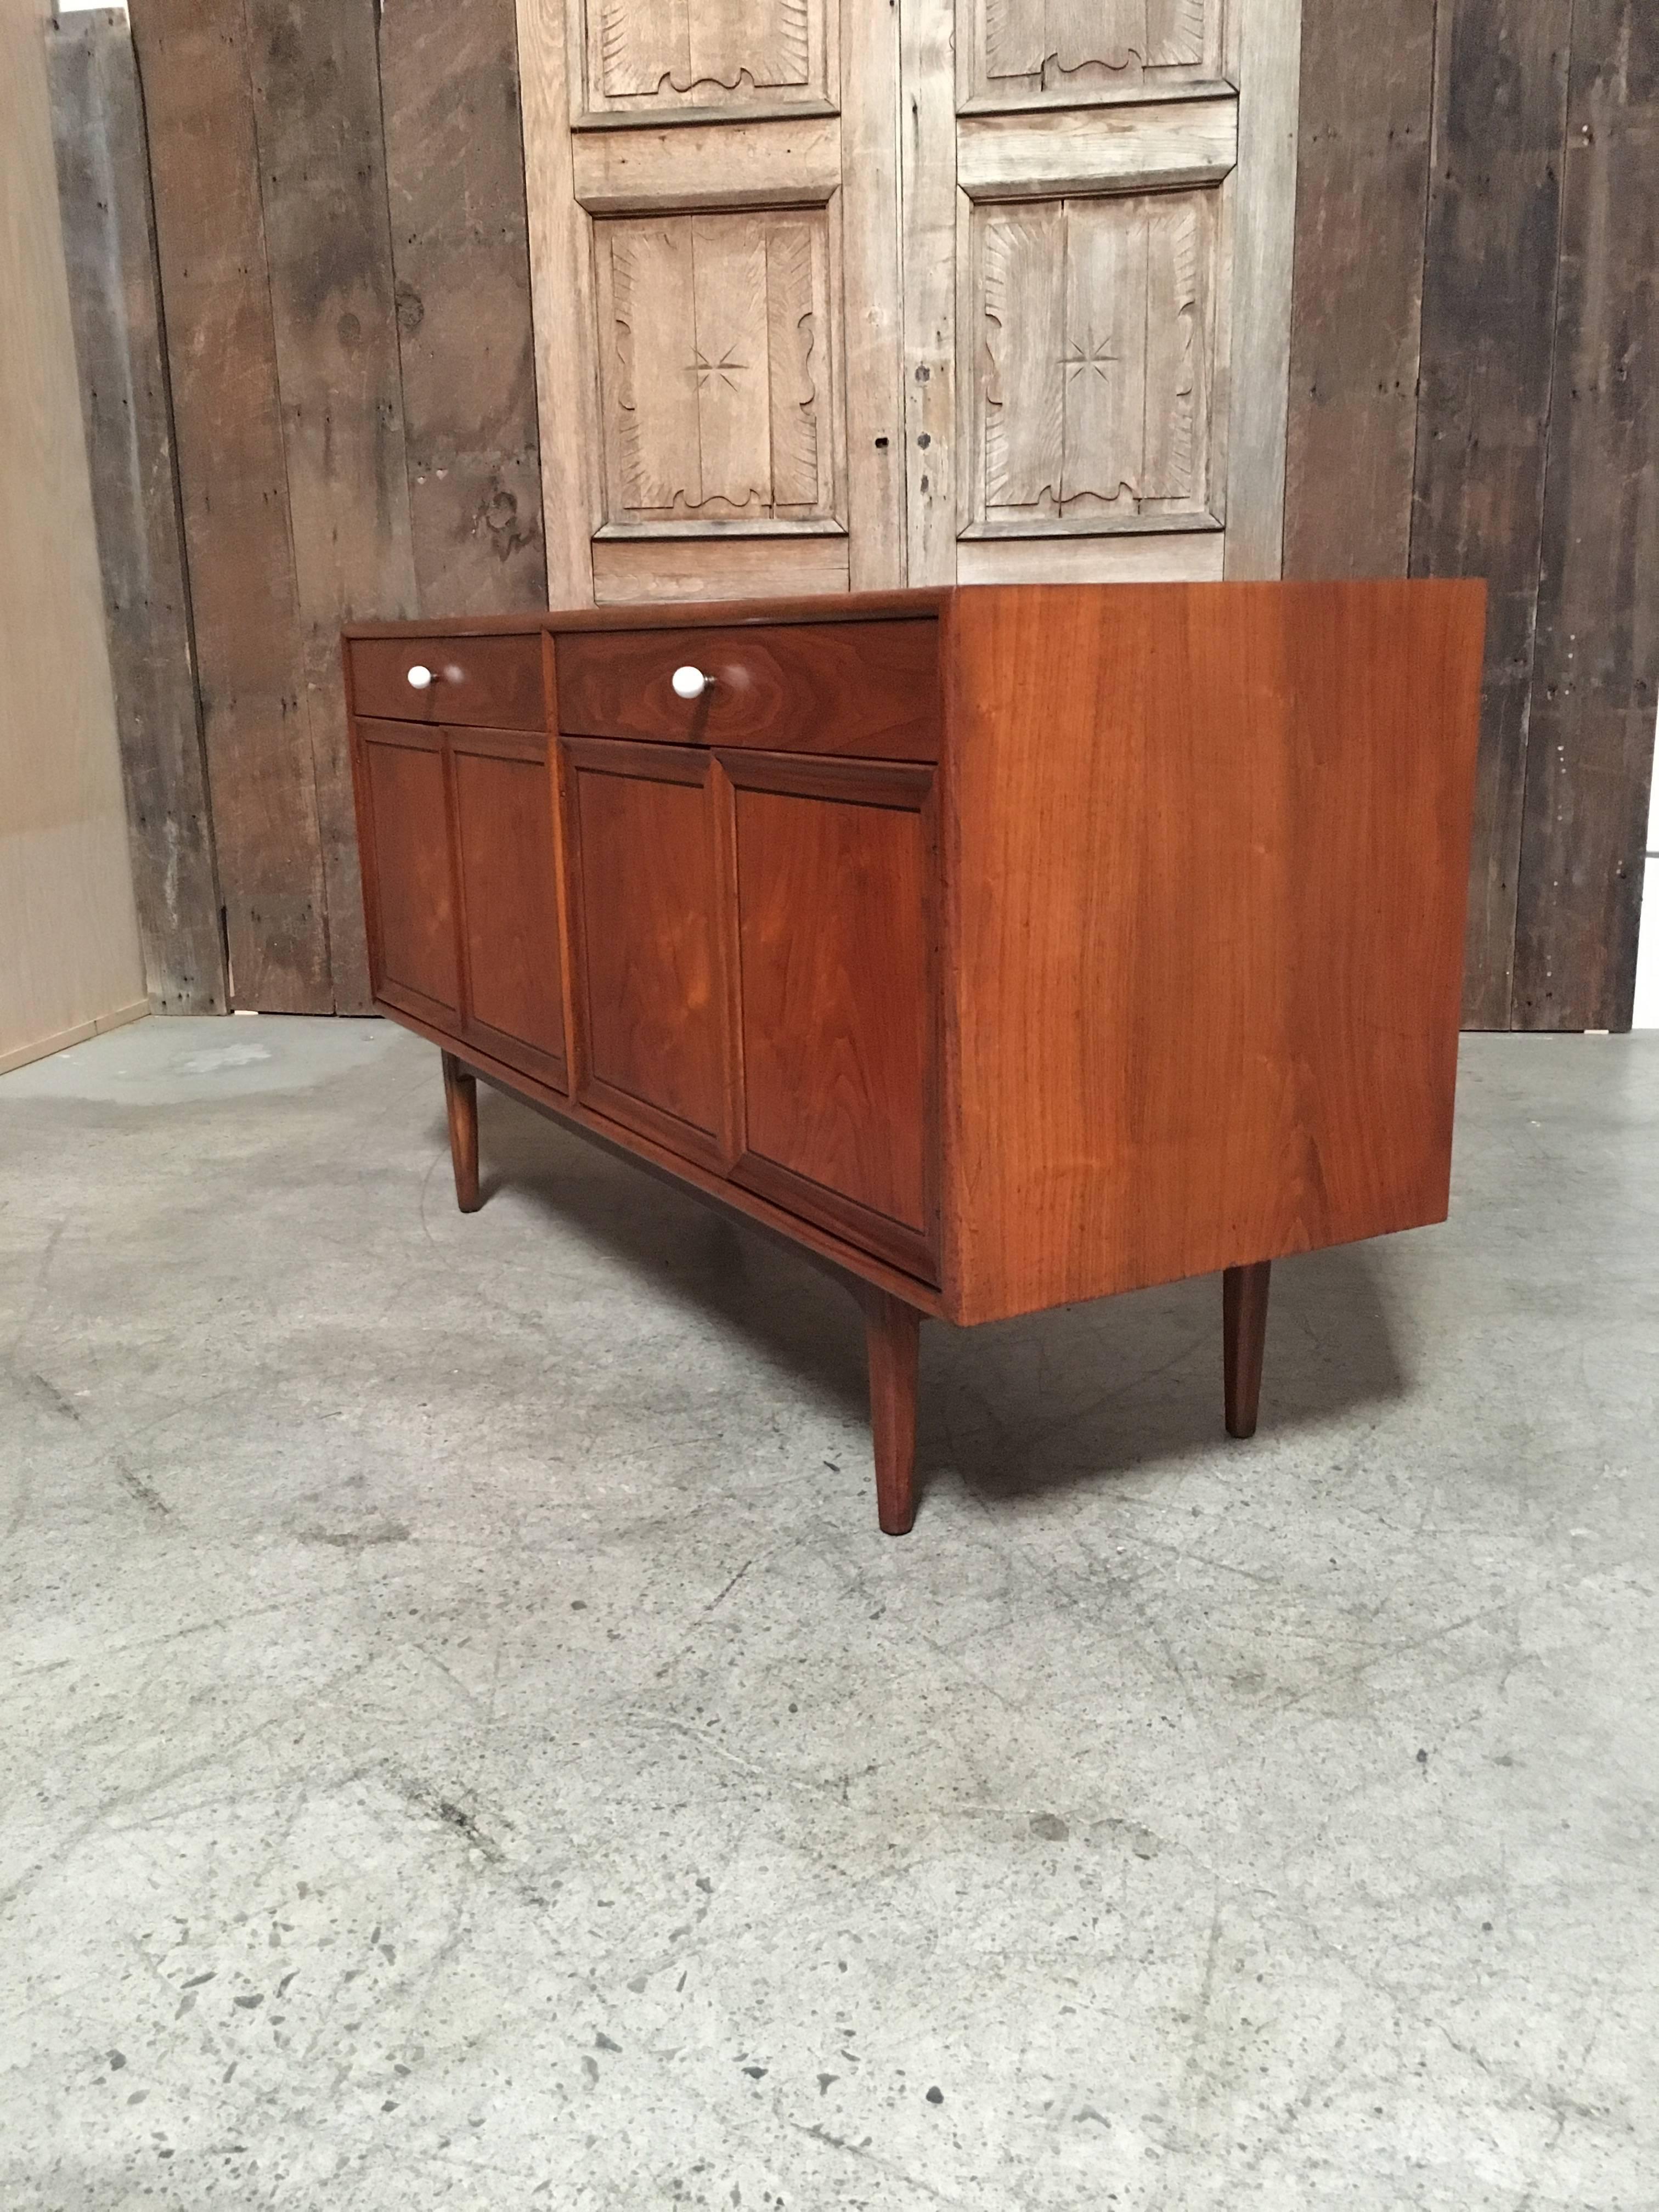 Drexel Declaration series credenza designed by Kipp Stewart with four doors and two drawers and original cue ball drawer pulls.